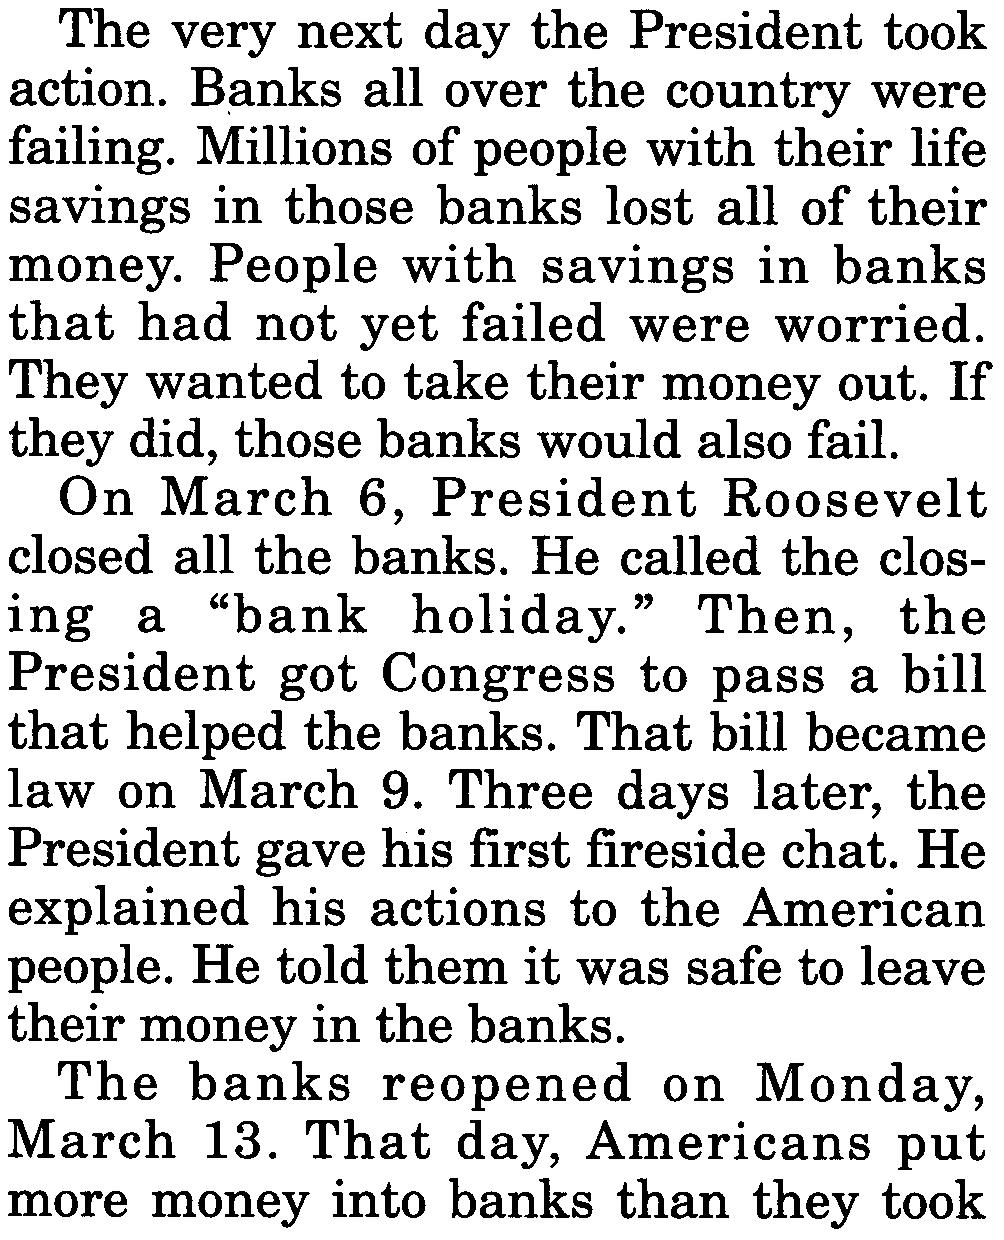 "The only thing we have to fear is fear itself," he said. He promised to act against the Depression. The very next day the President took action. Banks allover the country were failing.